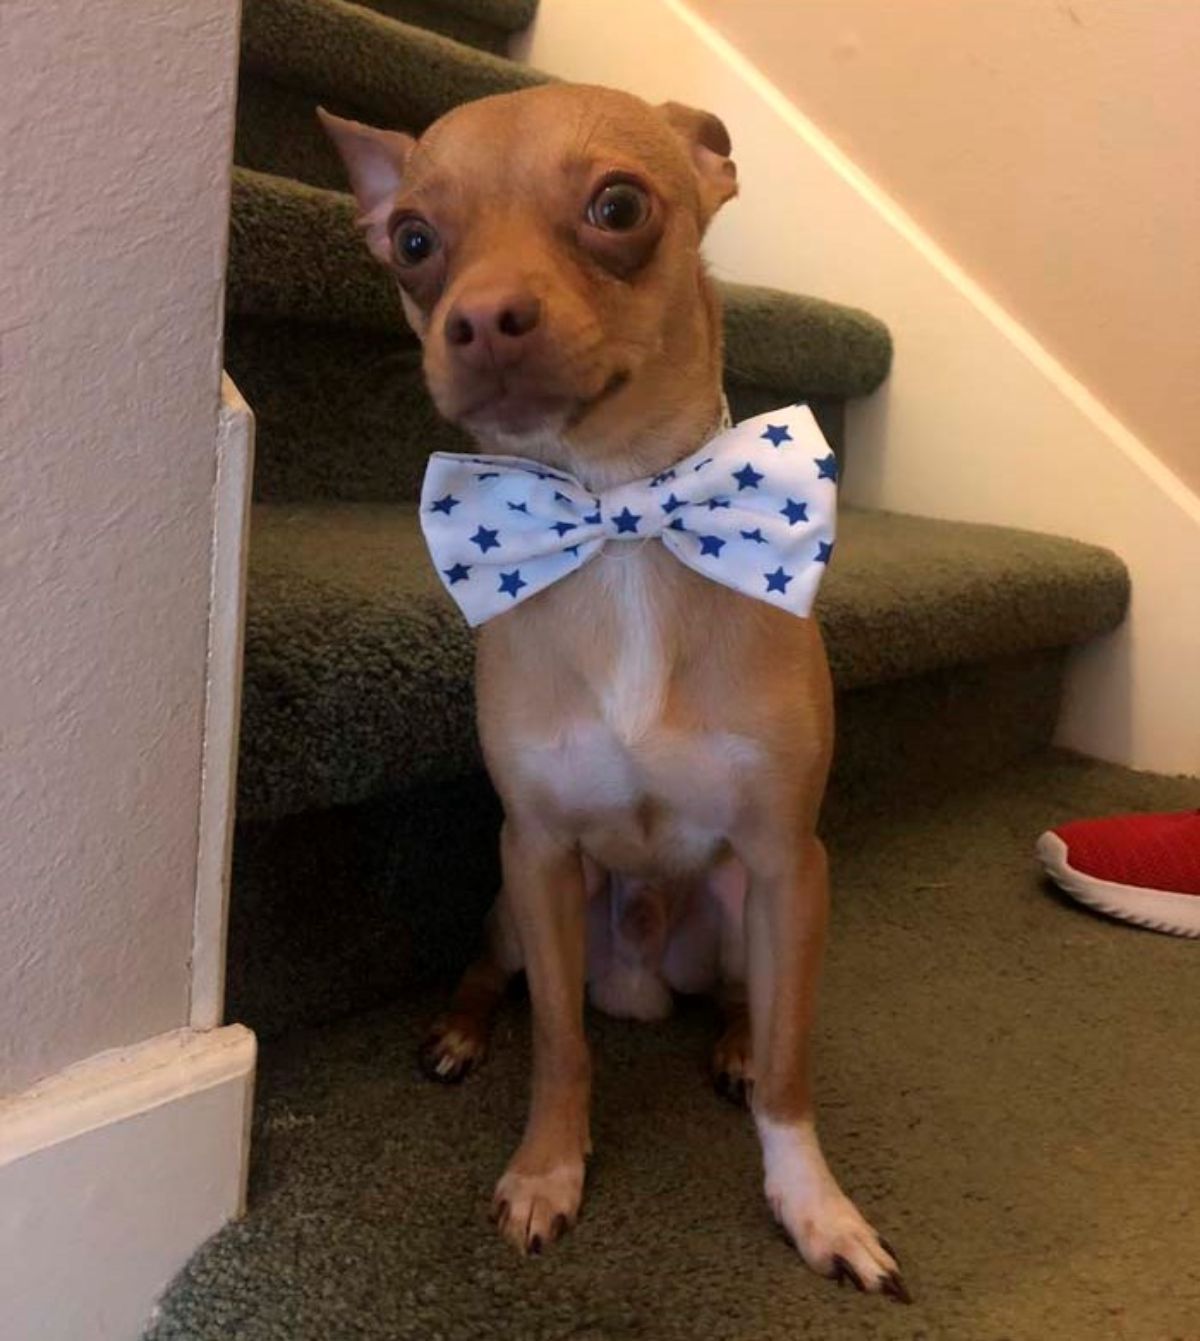 small brown dog sitting on stairs wearing a white bow tie with blue stars in it